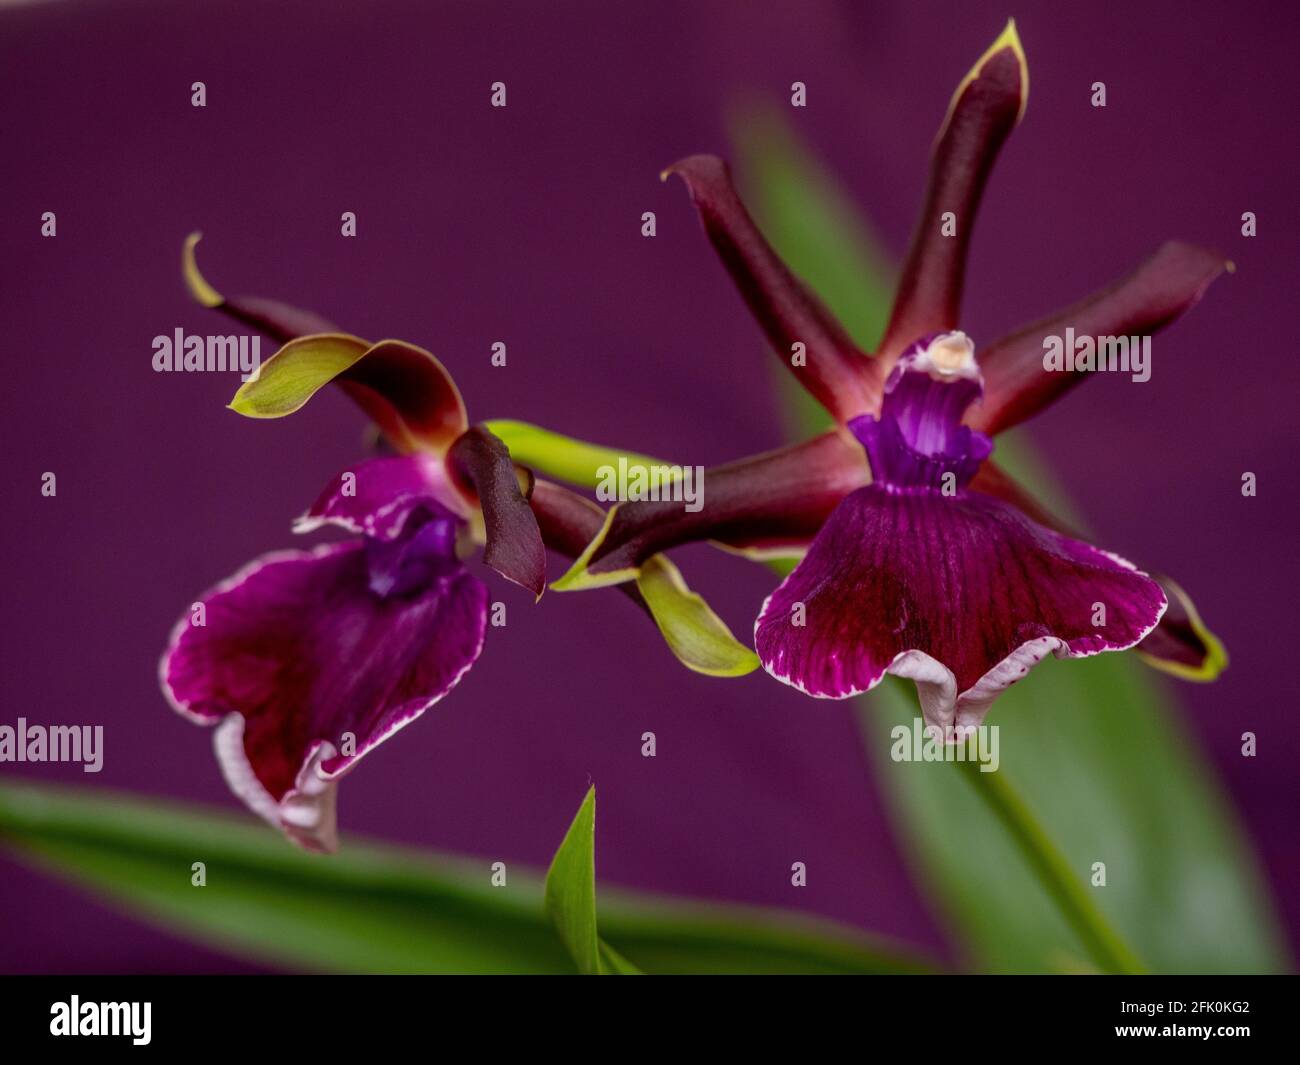 Deep purple Zygopetalum Orchid blooms with fresh green leaves on purple background.Beautiful flowers edged with green. Stock Photo